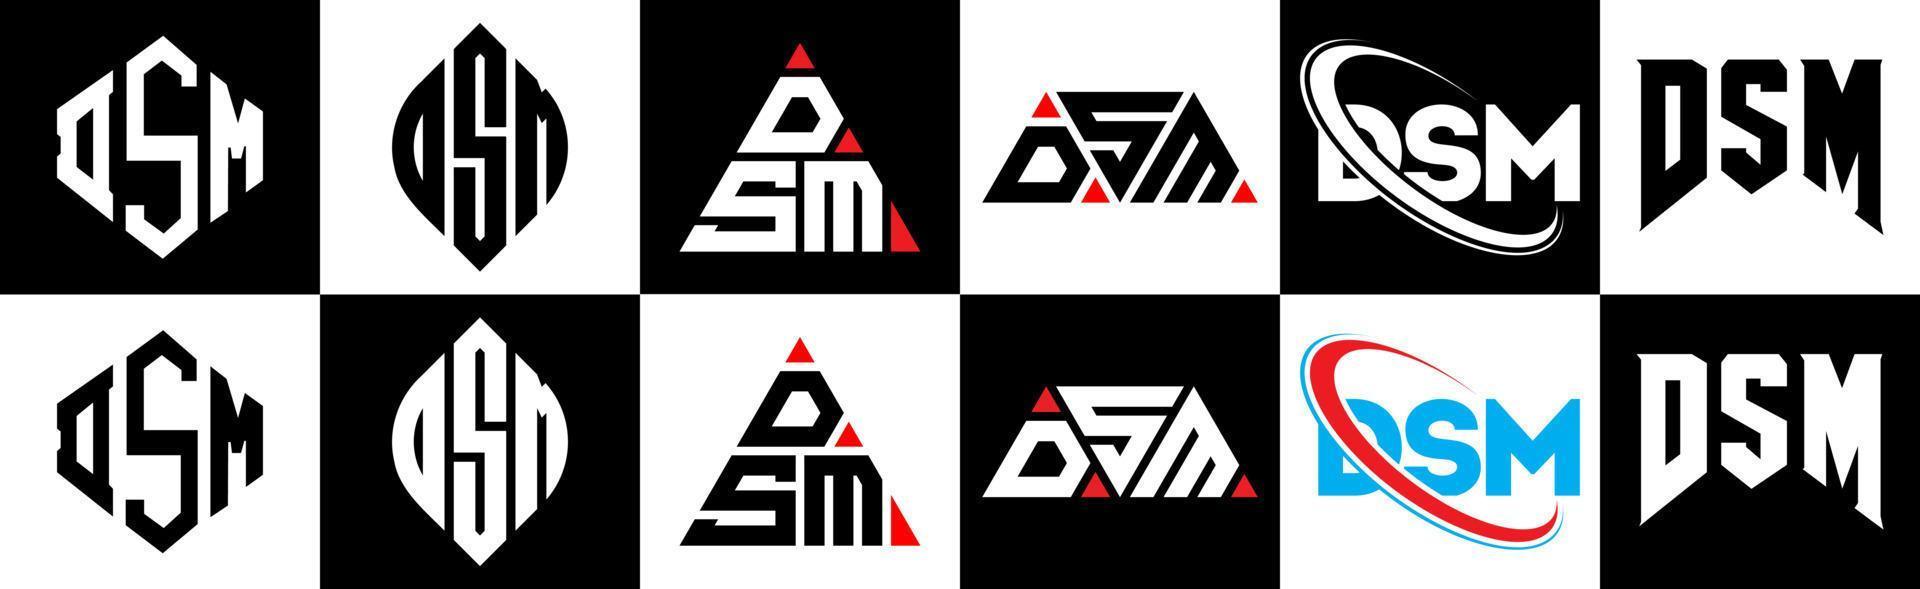 DSM letter logo design in six style. DSM polygon, circle, triangle, hexagon, flat and simple style with black and white color variation letter logo set in one artboard. DSM minimalist and classic logo vector